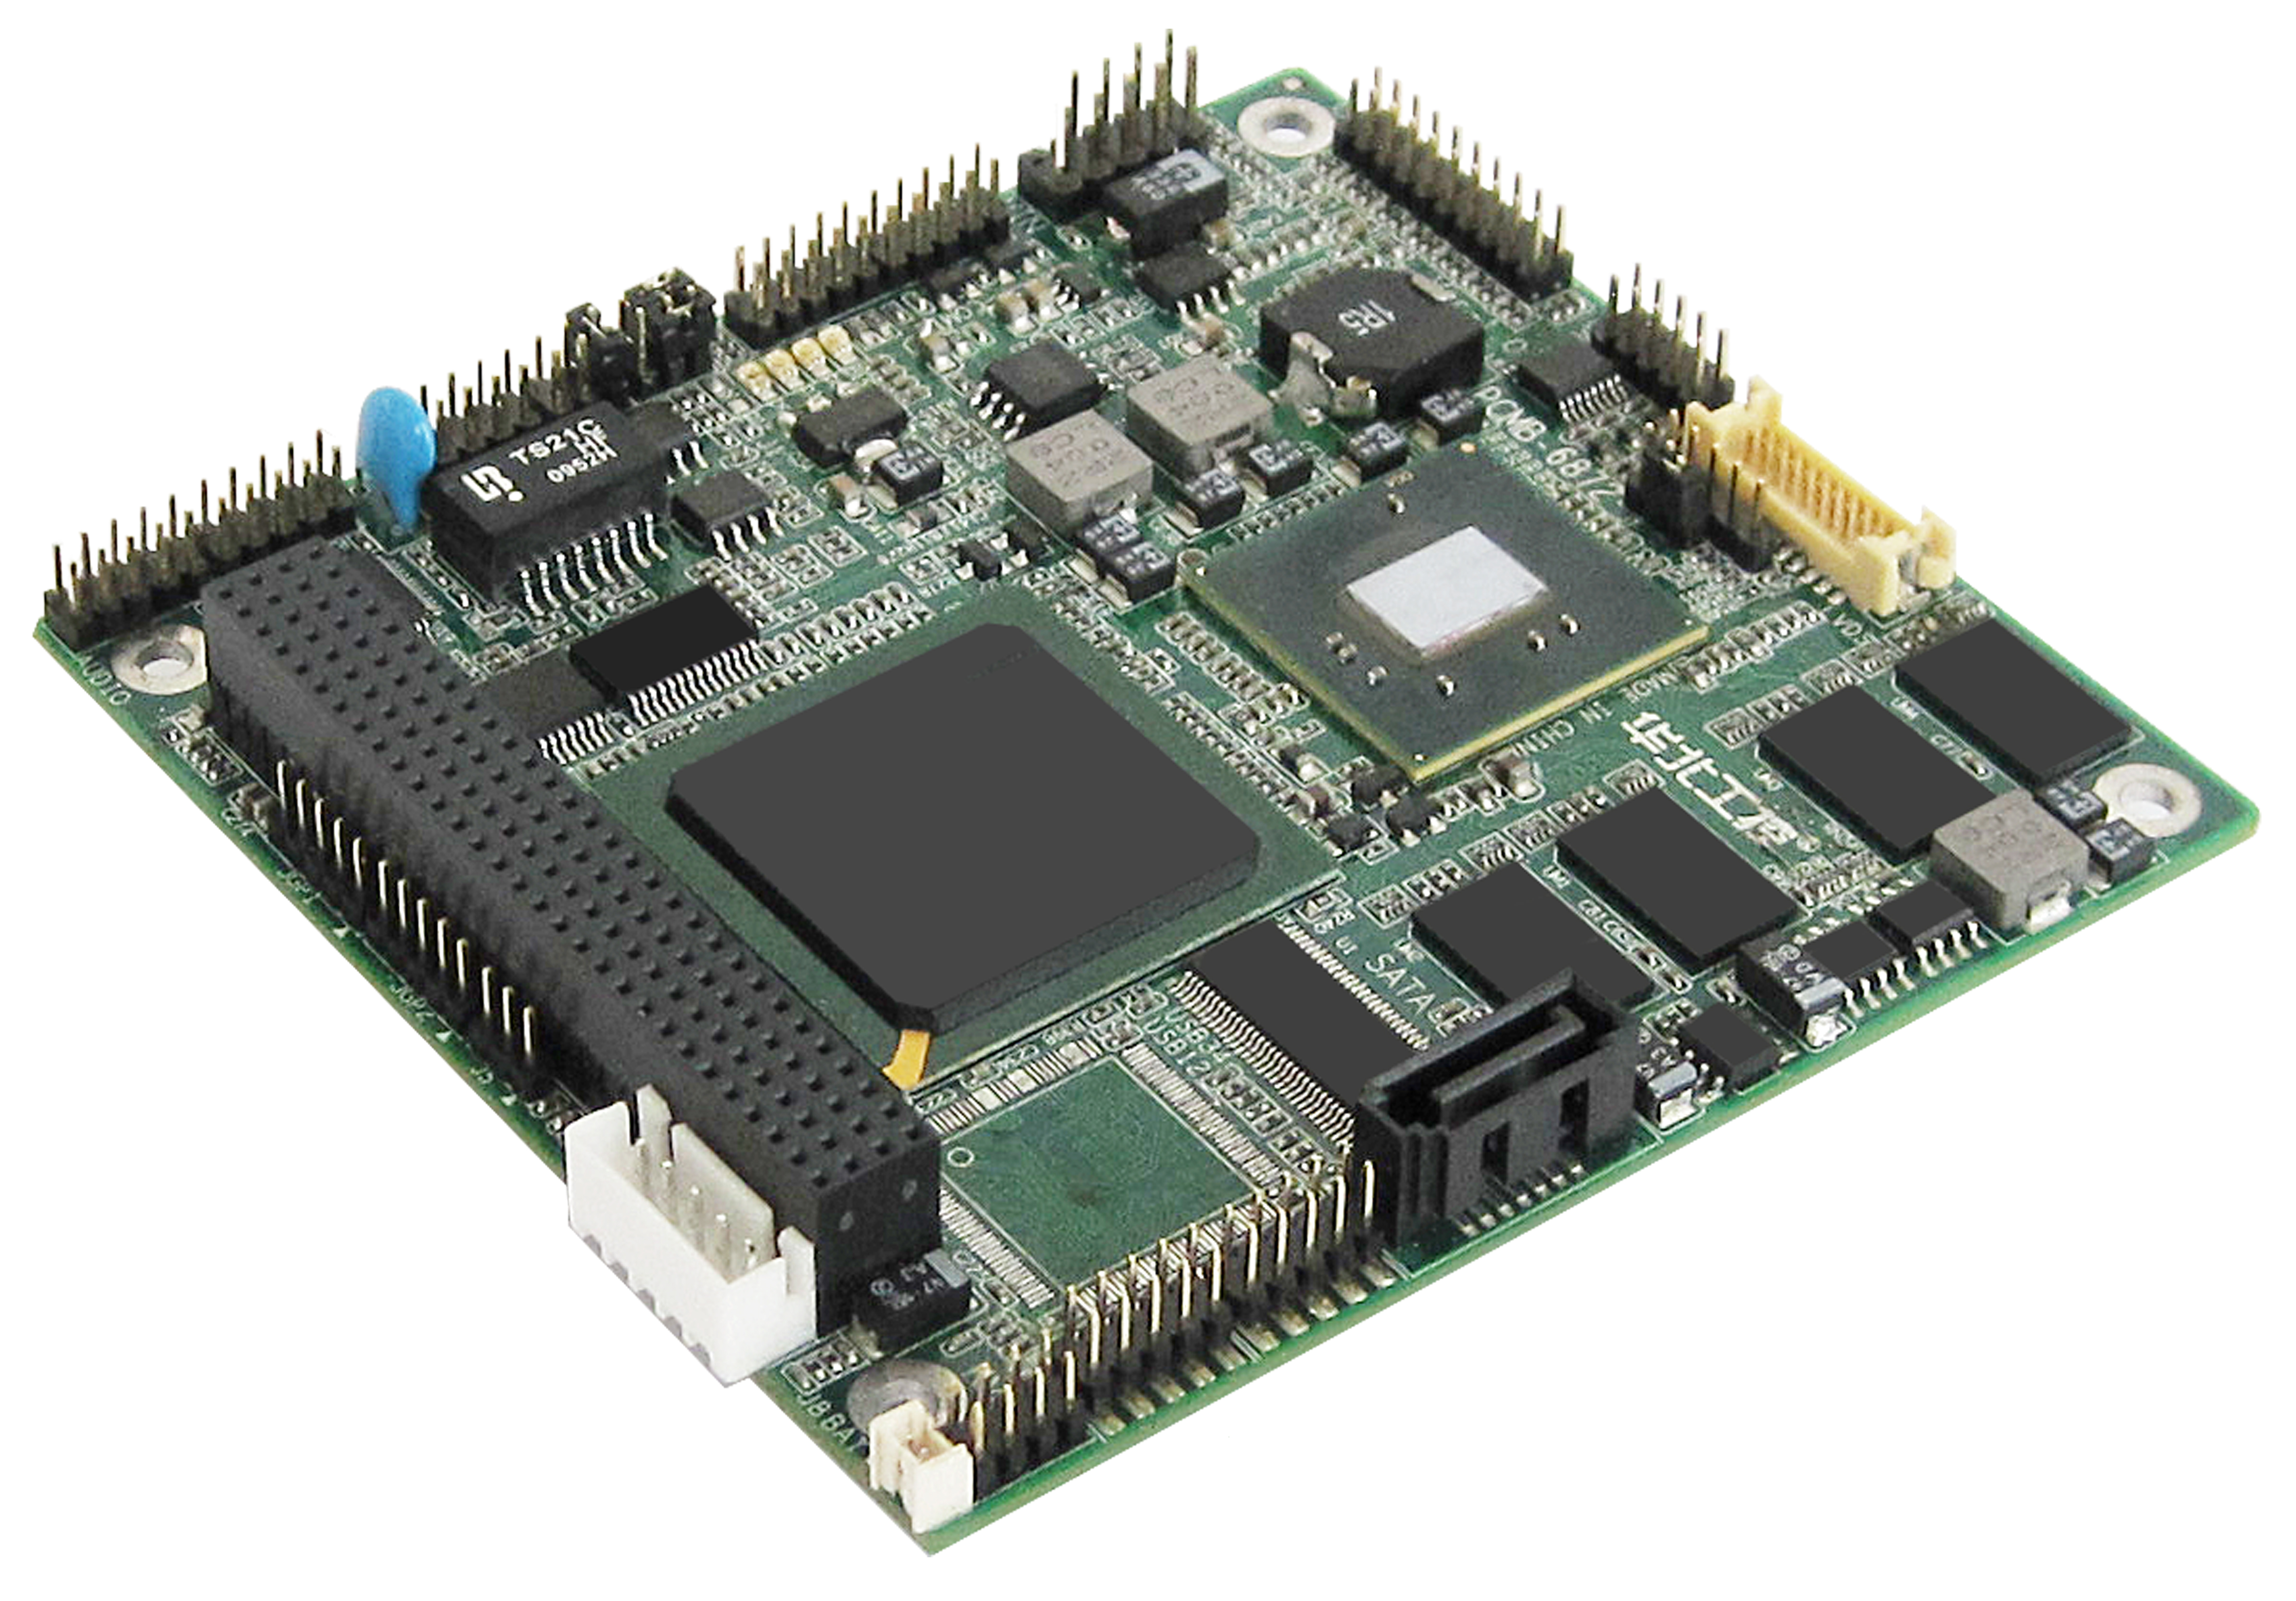 Harde ring Netto totaal PCMB-6872 PCI-104 Intel Atom N450 1.66GHz SBC - Assured Systems